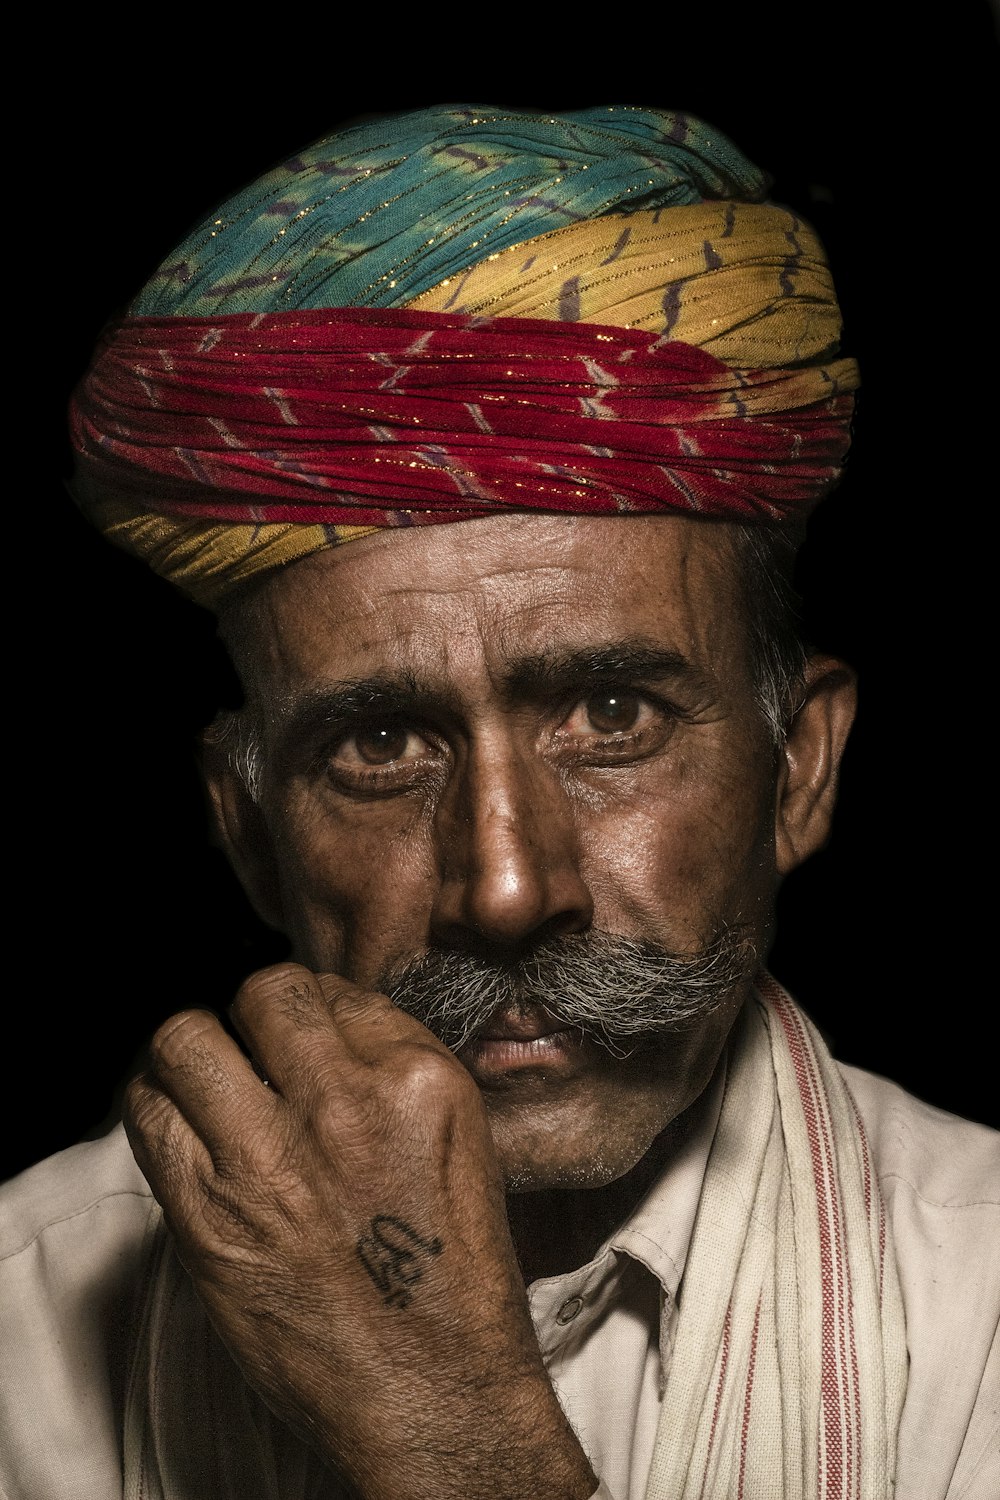 a man with a mustache and a colorful turban